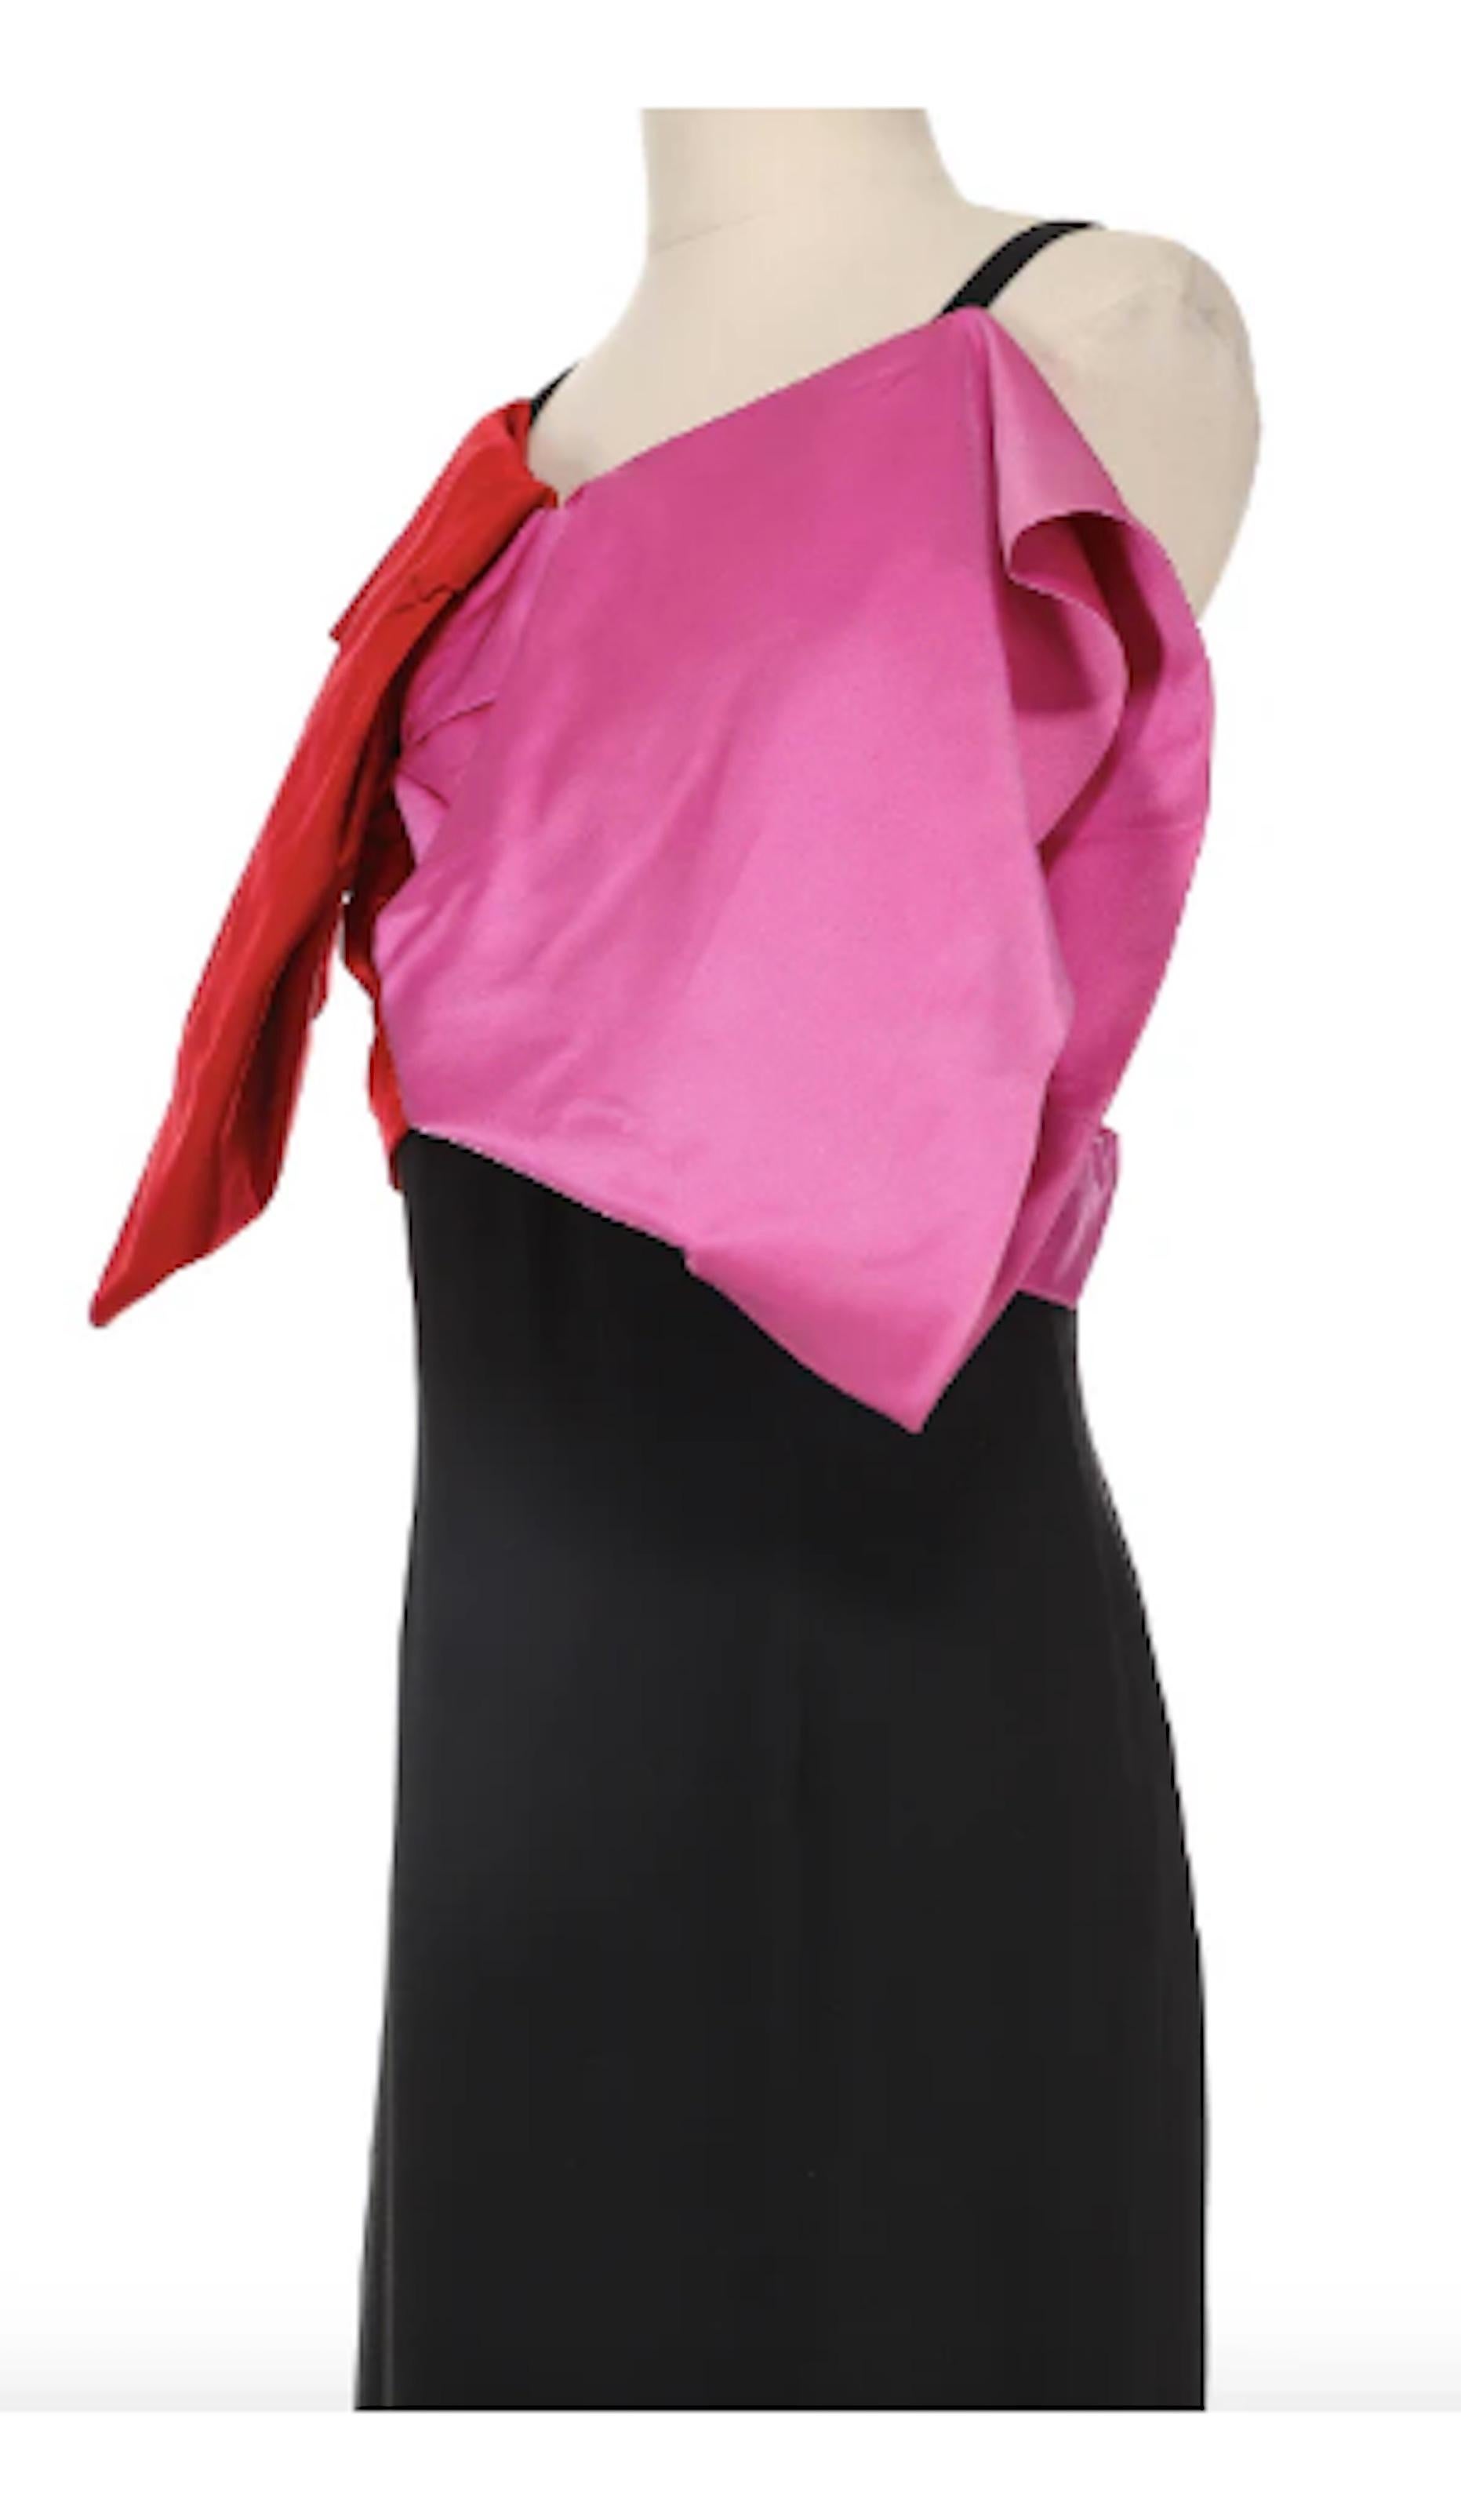 Bill Blass 1970's Black Evening Dress With Pink and Red Bow In Excellent Condition For Sale In New York, NY